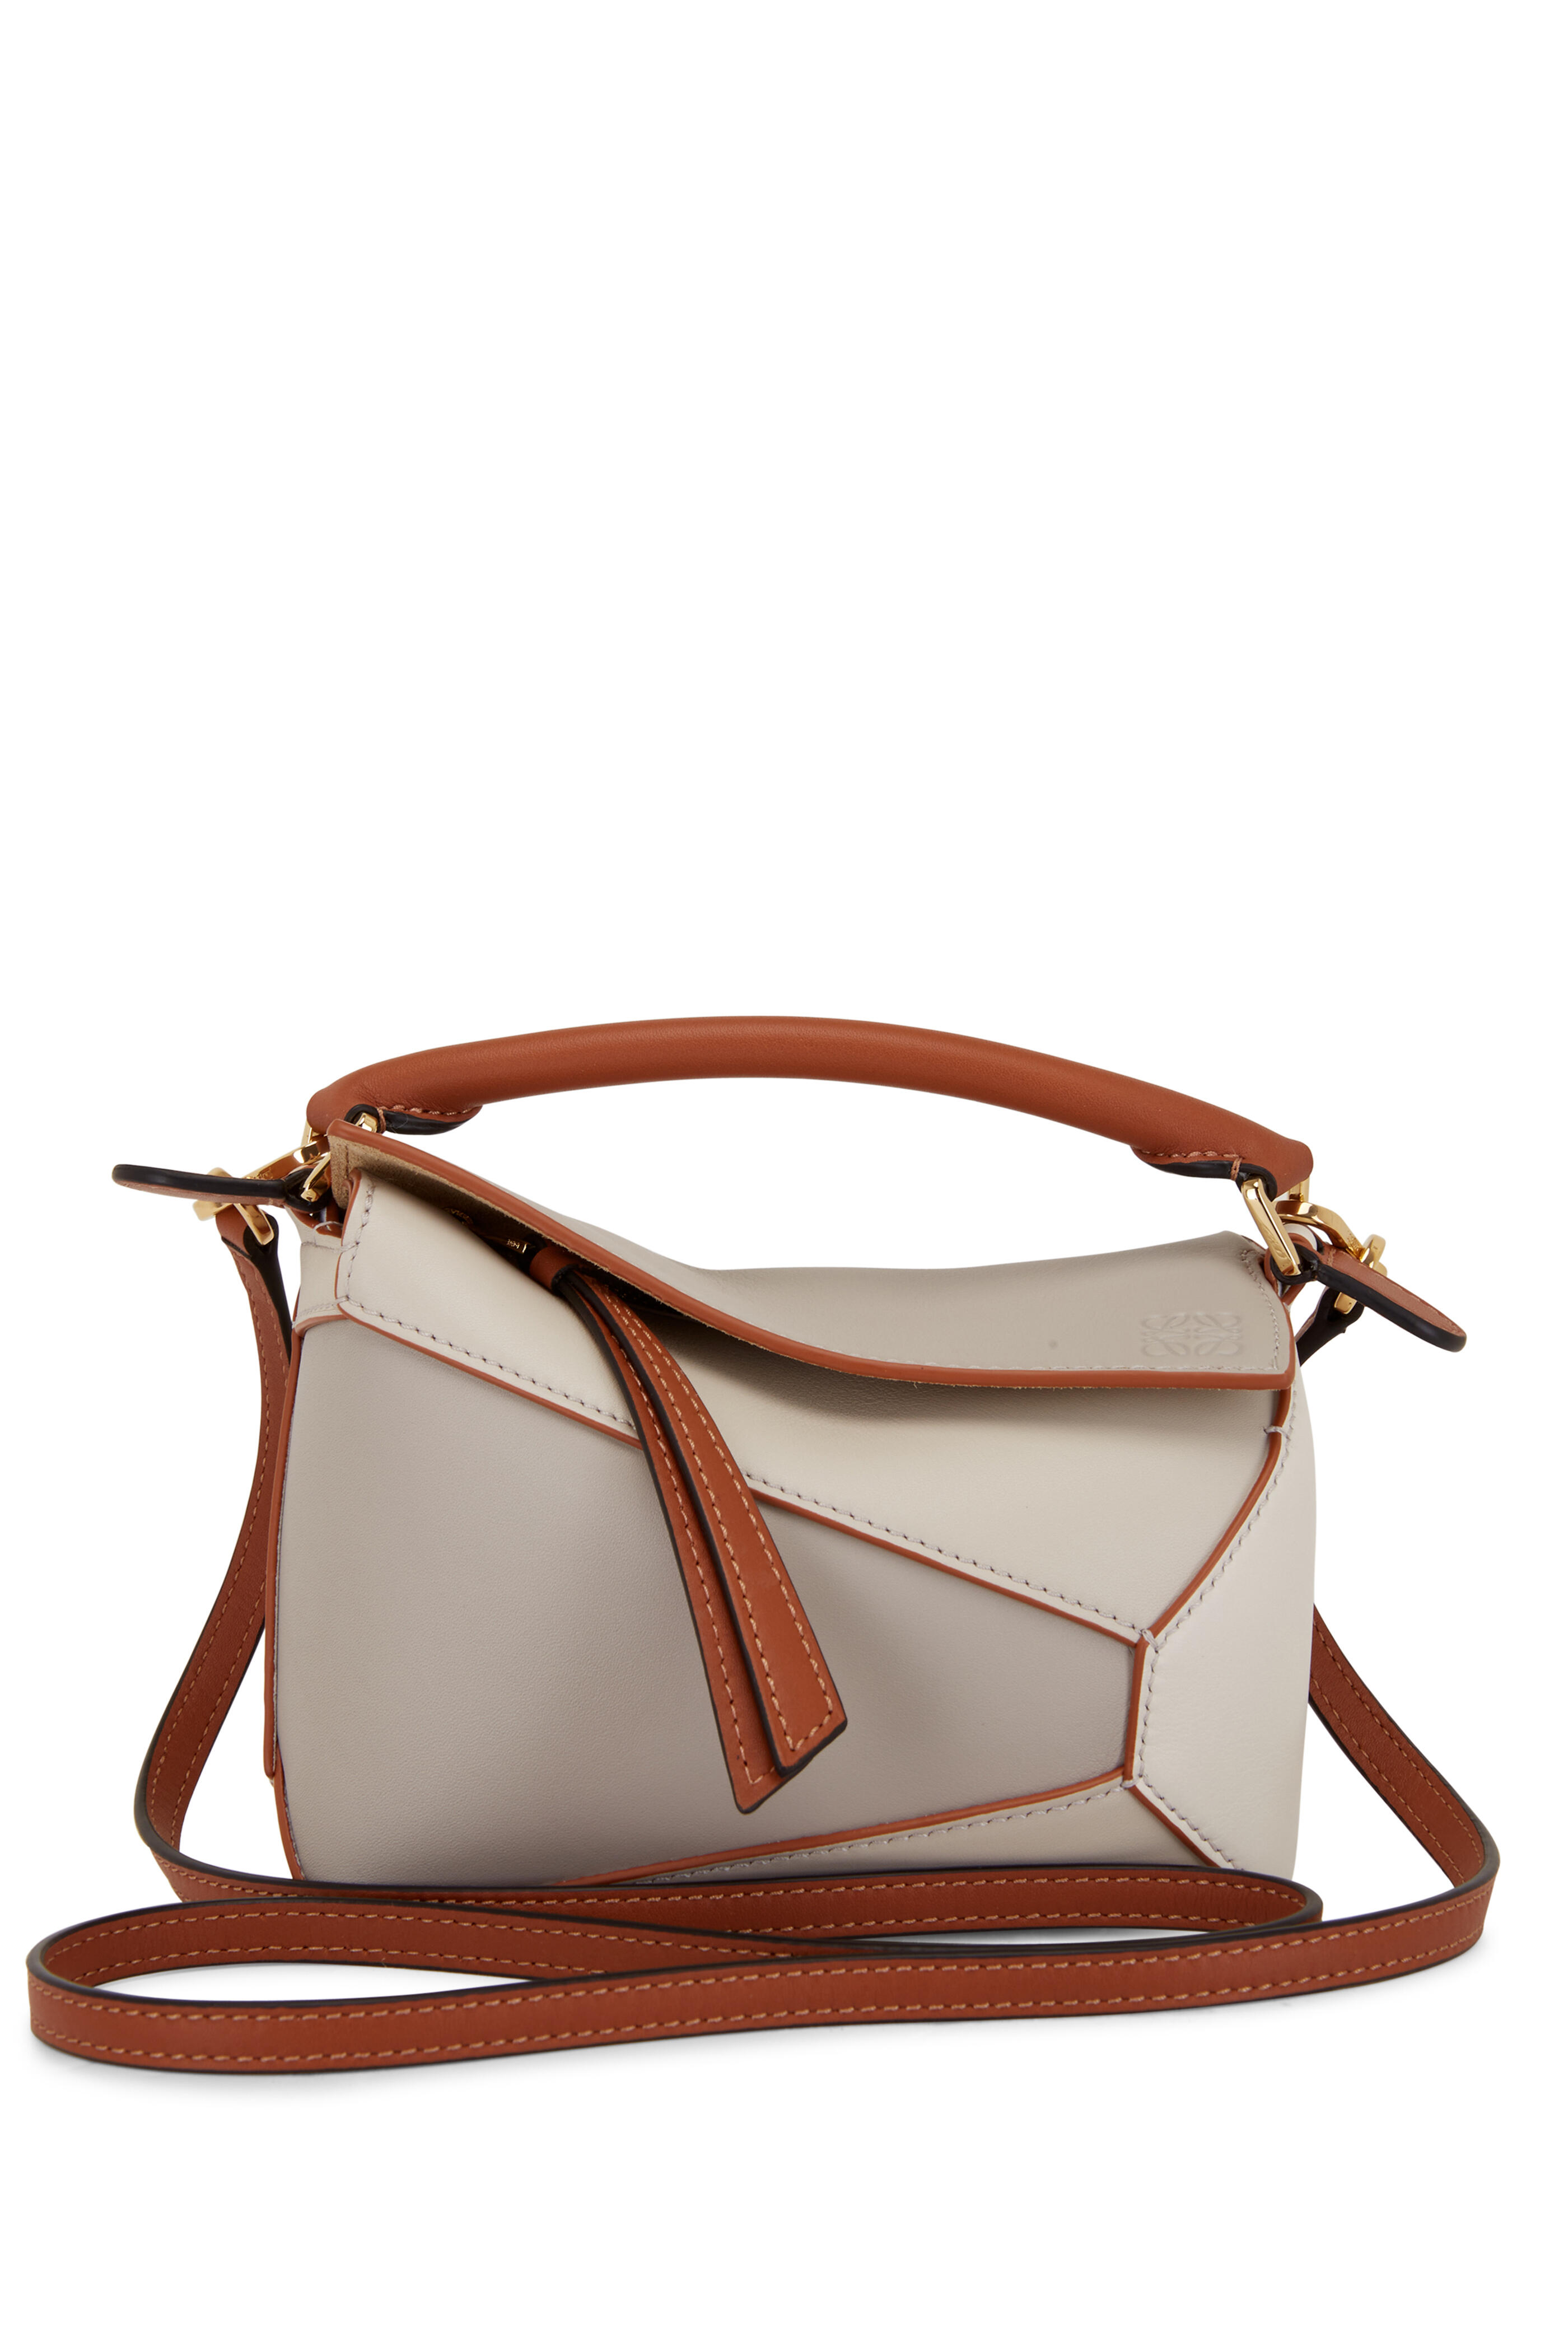 Loewe Women's Mini Puzzle Dust Beige & Soft White Shoulder Bag | by Mitchell Stores